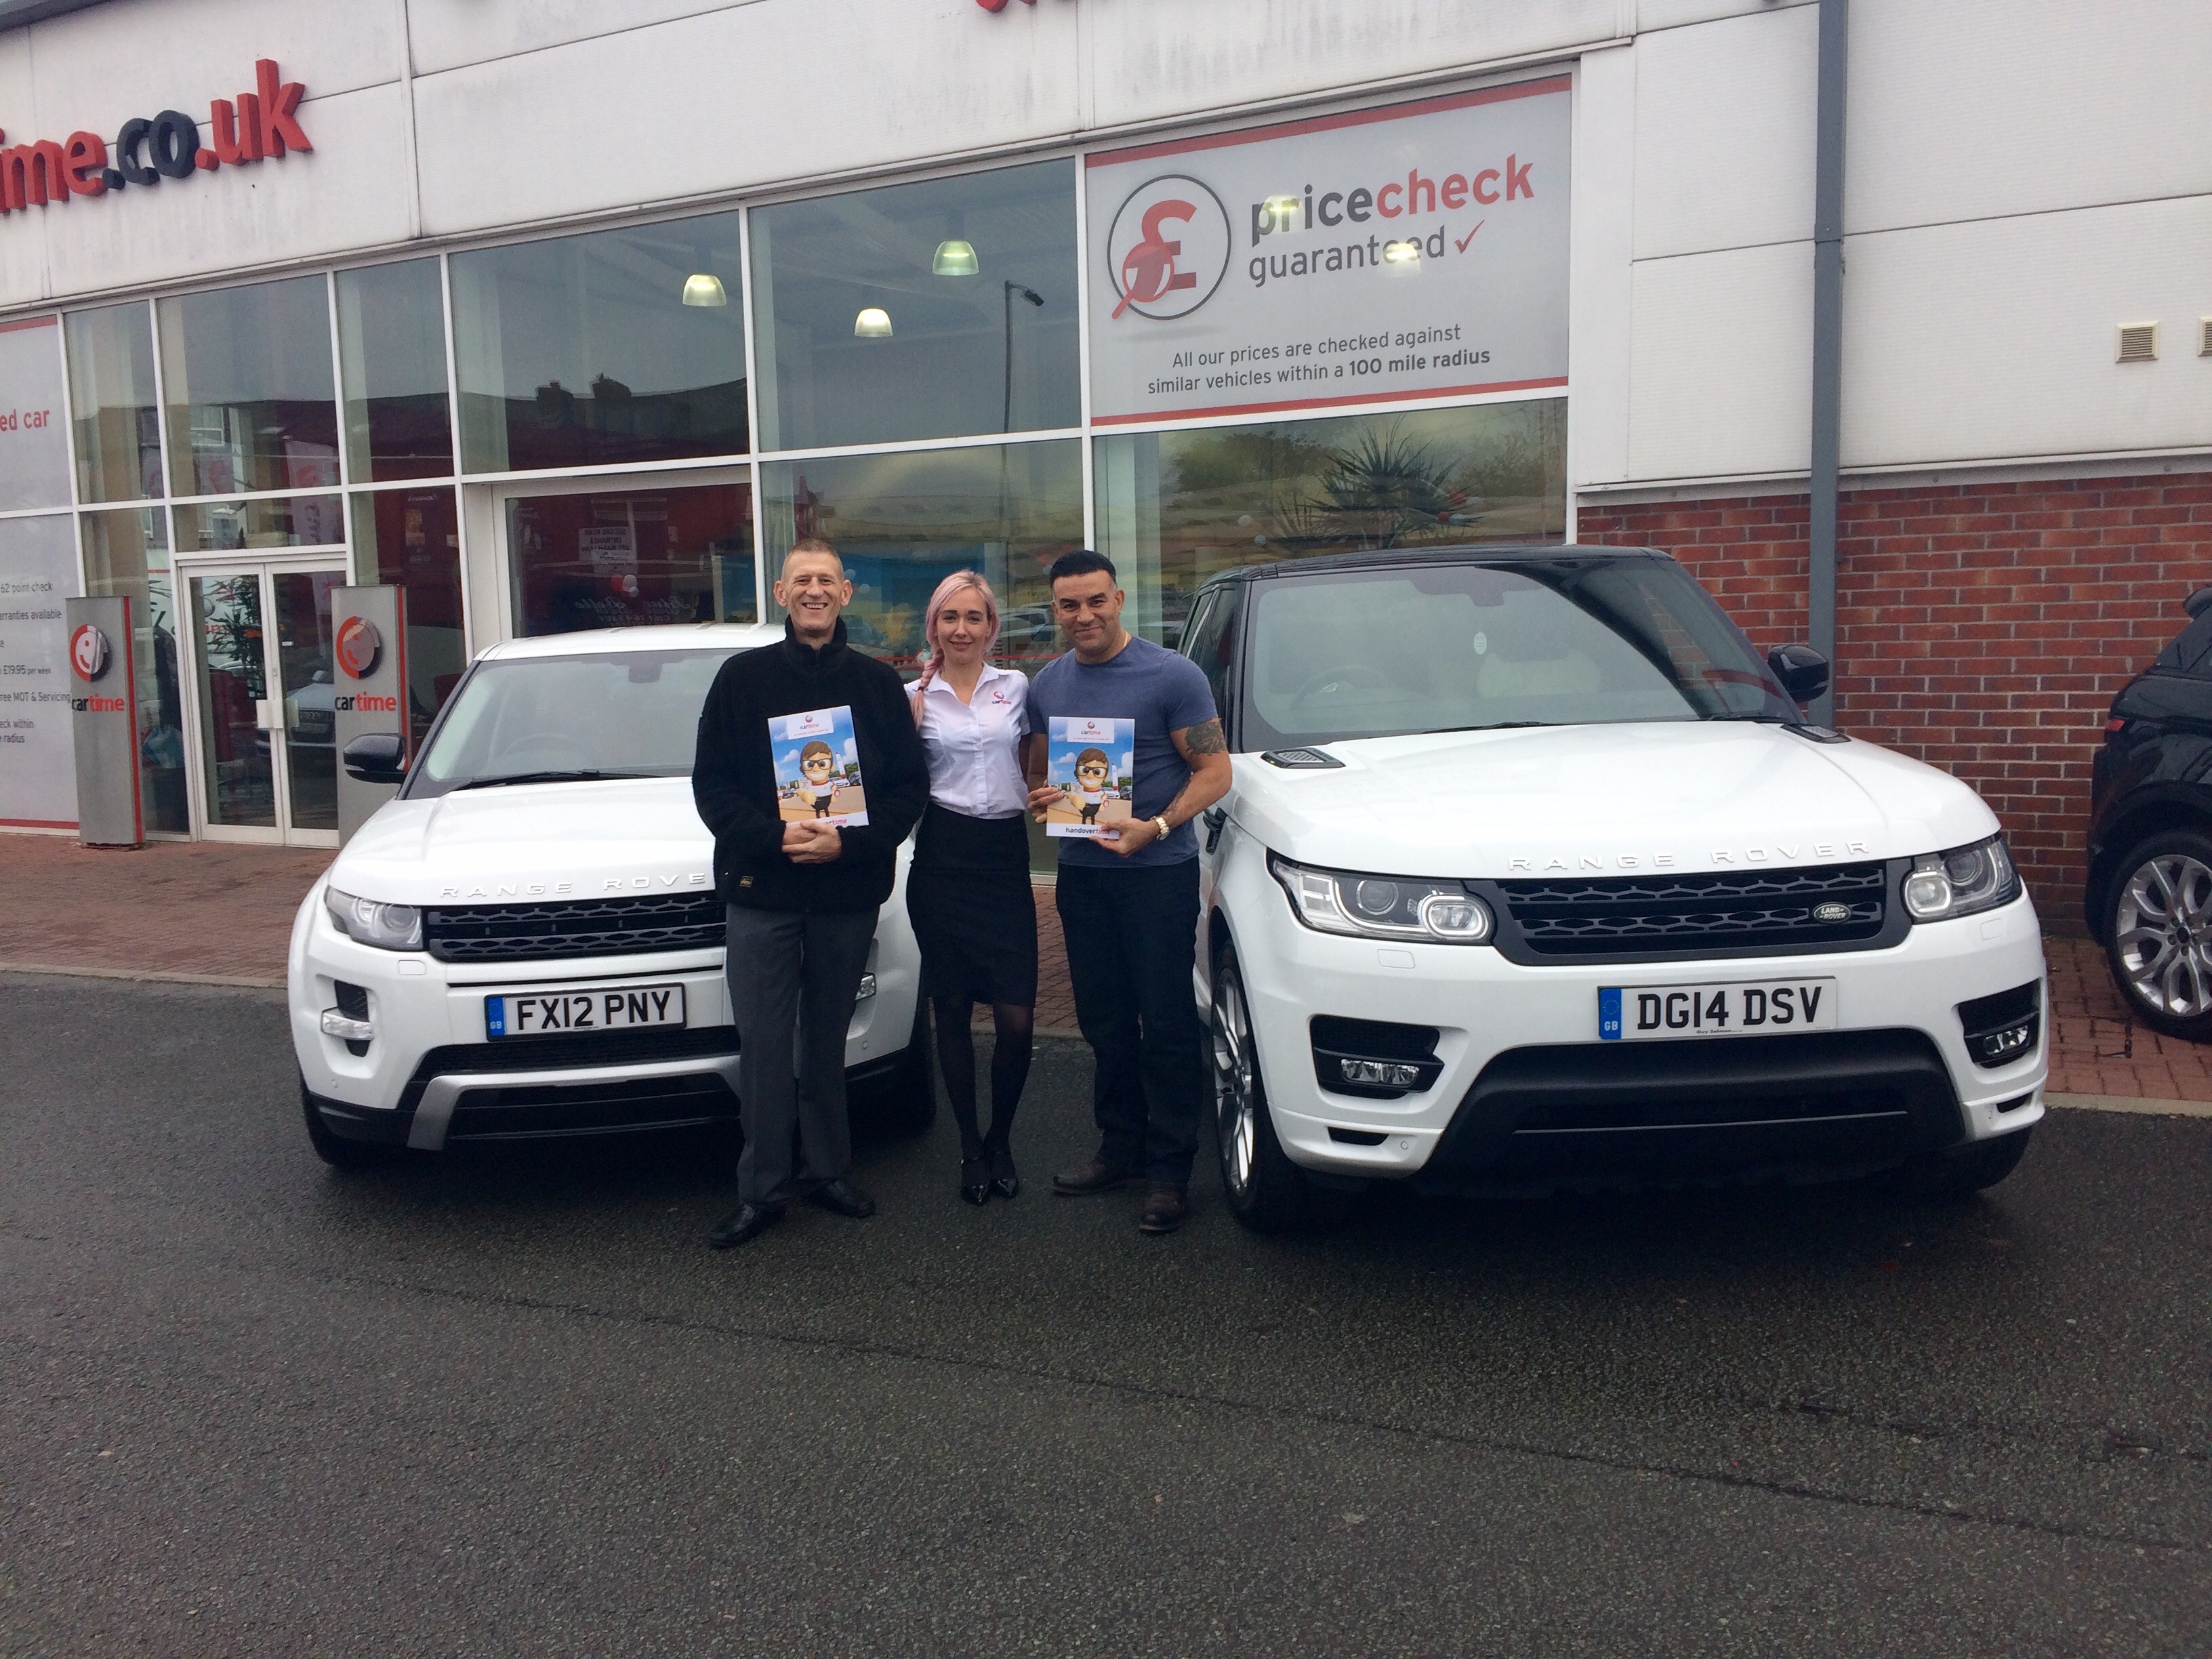 Main image for post: We're Supporting CanCare: Boxer Robin Reid and Author Stuart Haworth Visit cartime